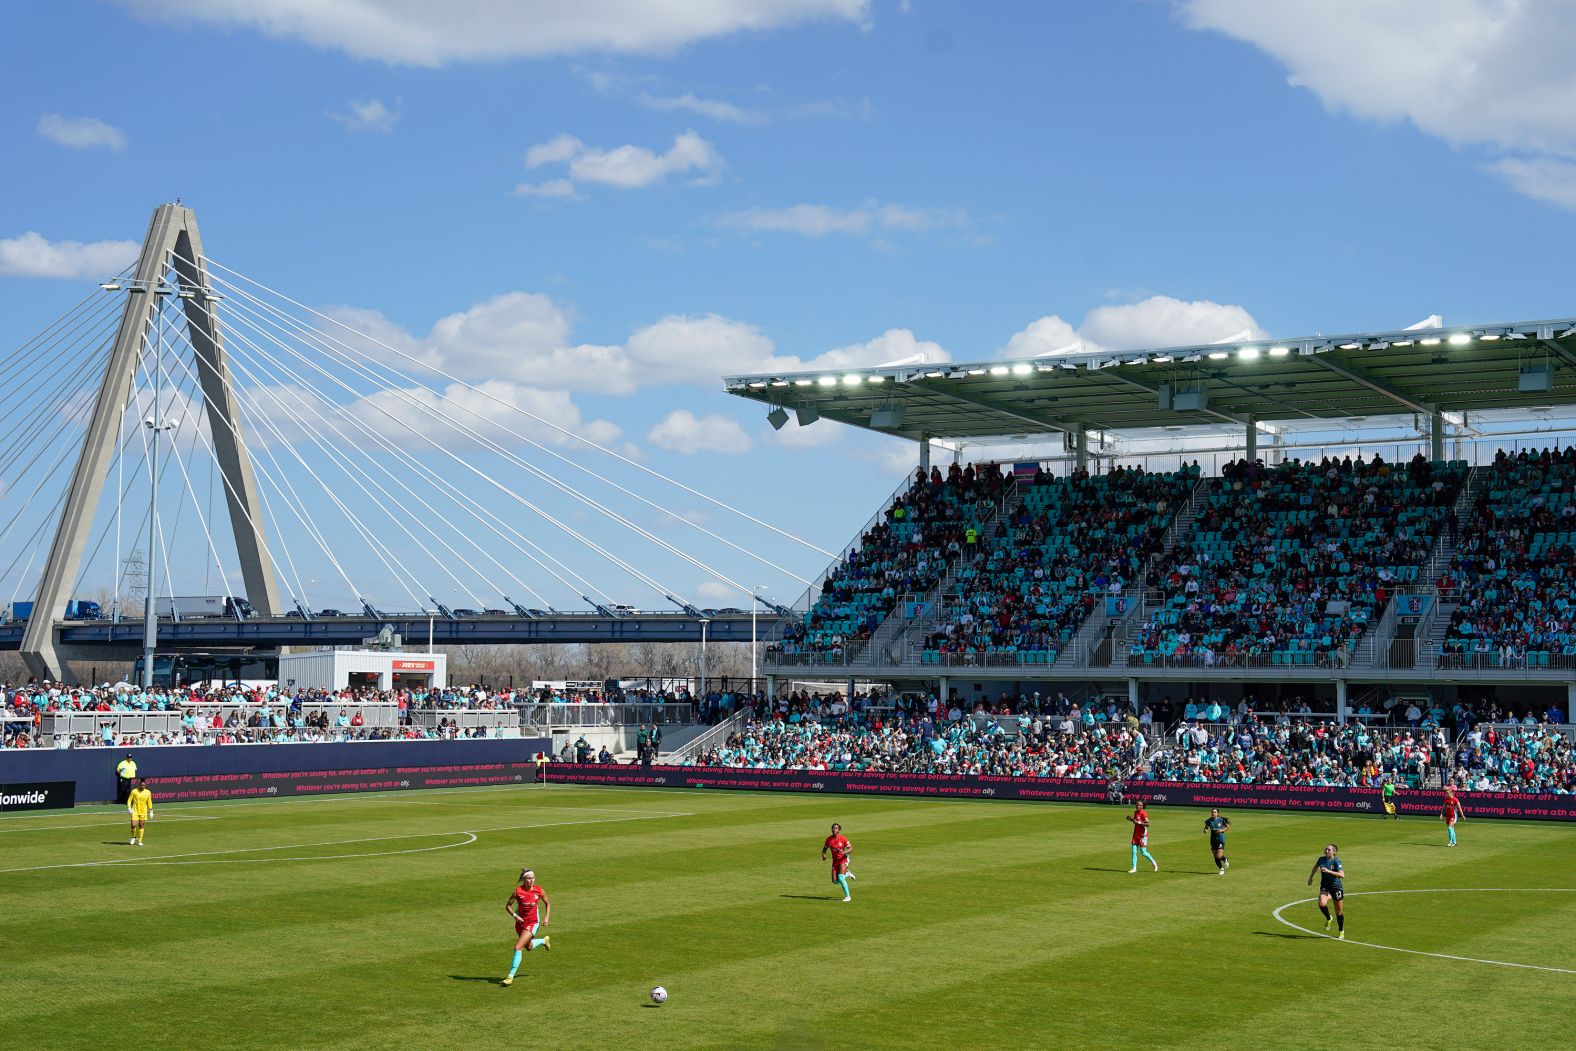 The Kansas City Current take on Portland Thorns FC during their season opener at the newly-built <a href="https://cpkcstadium.com/stadium" target="_blank" target="_blank">CPKC Stadium</a> in Kansas City, Missouri, on Saturday, March 16. The team touts the venue as "the first stadium purpose-built for a women's professional team in the world."